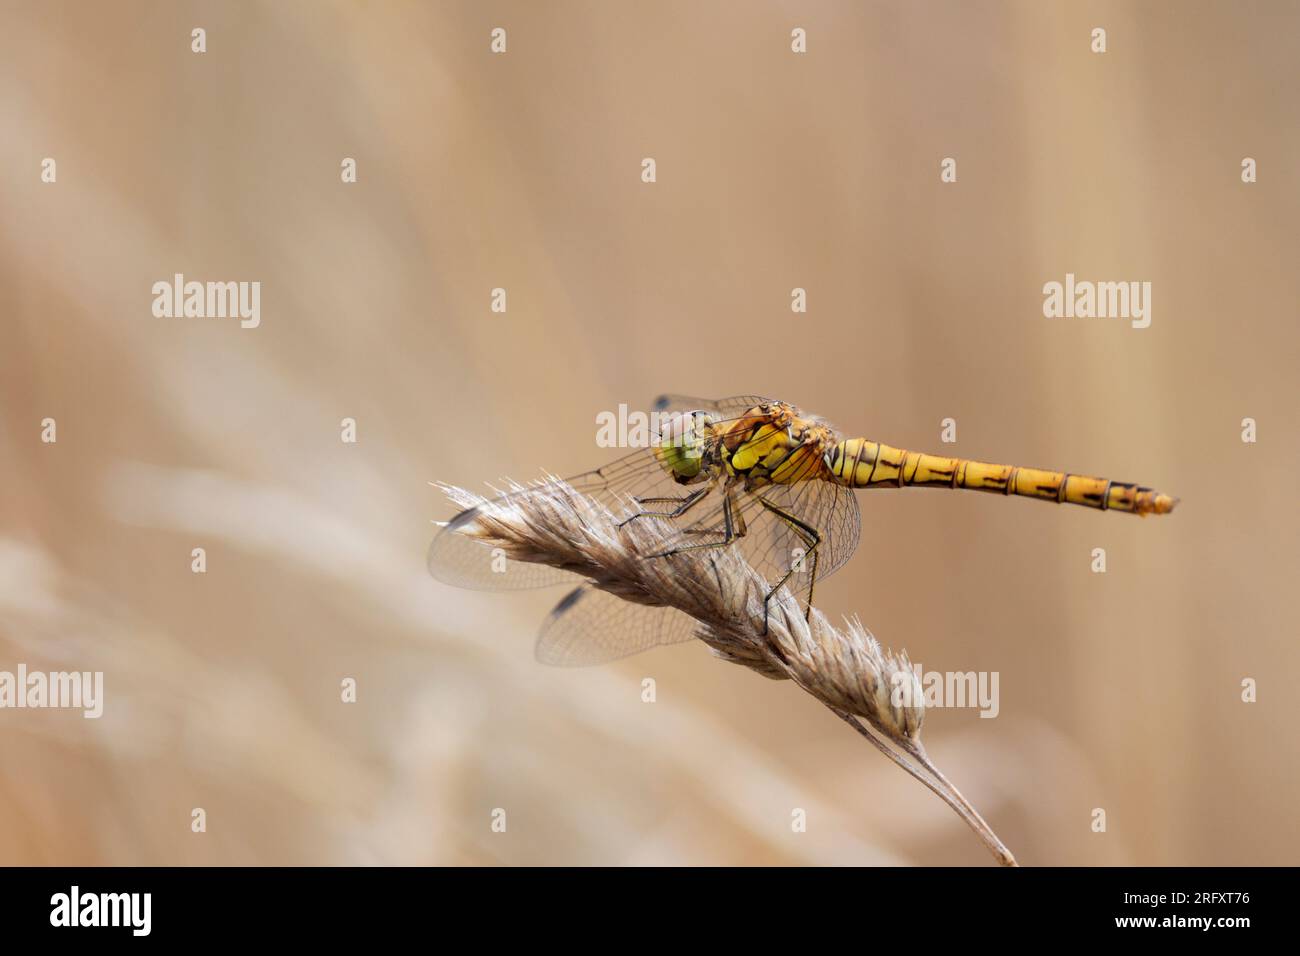 Common darter Sympetrum striolatum, female dragonfly perched on grass seed head, yellow brown with dark dashes on sides large eyes dots on wings Stock Photo